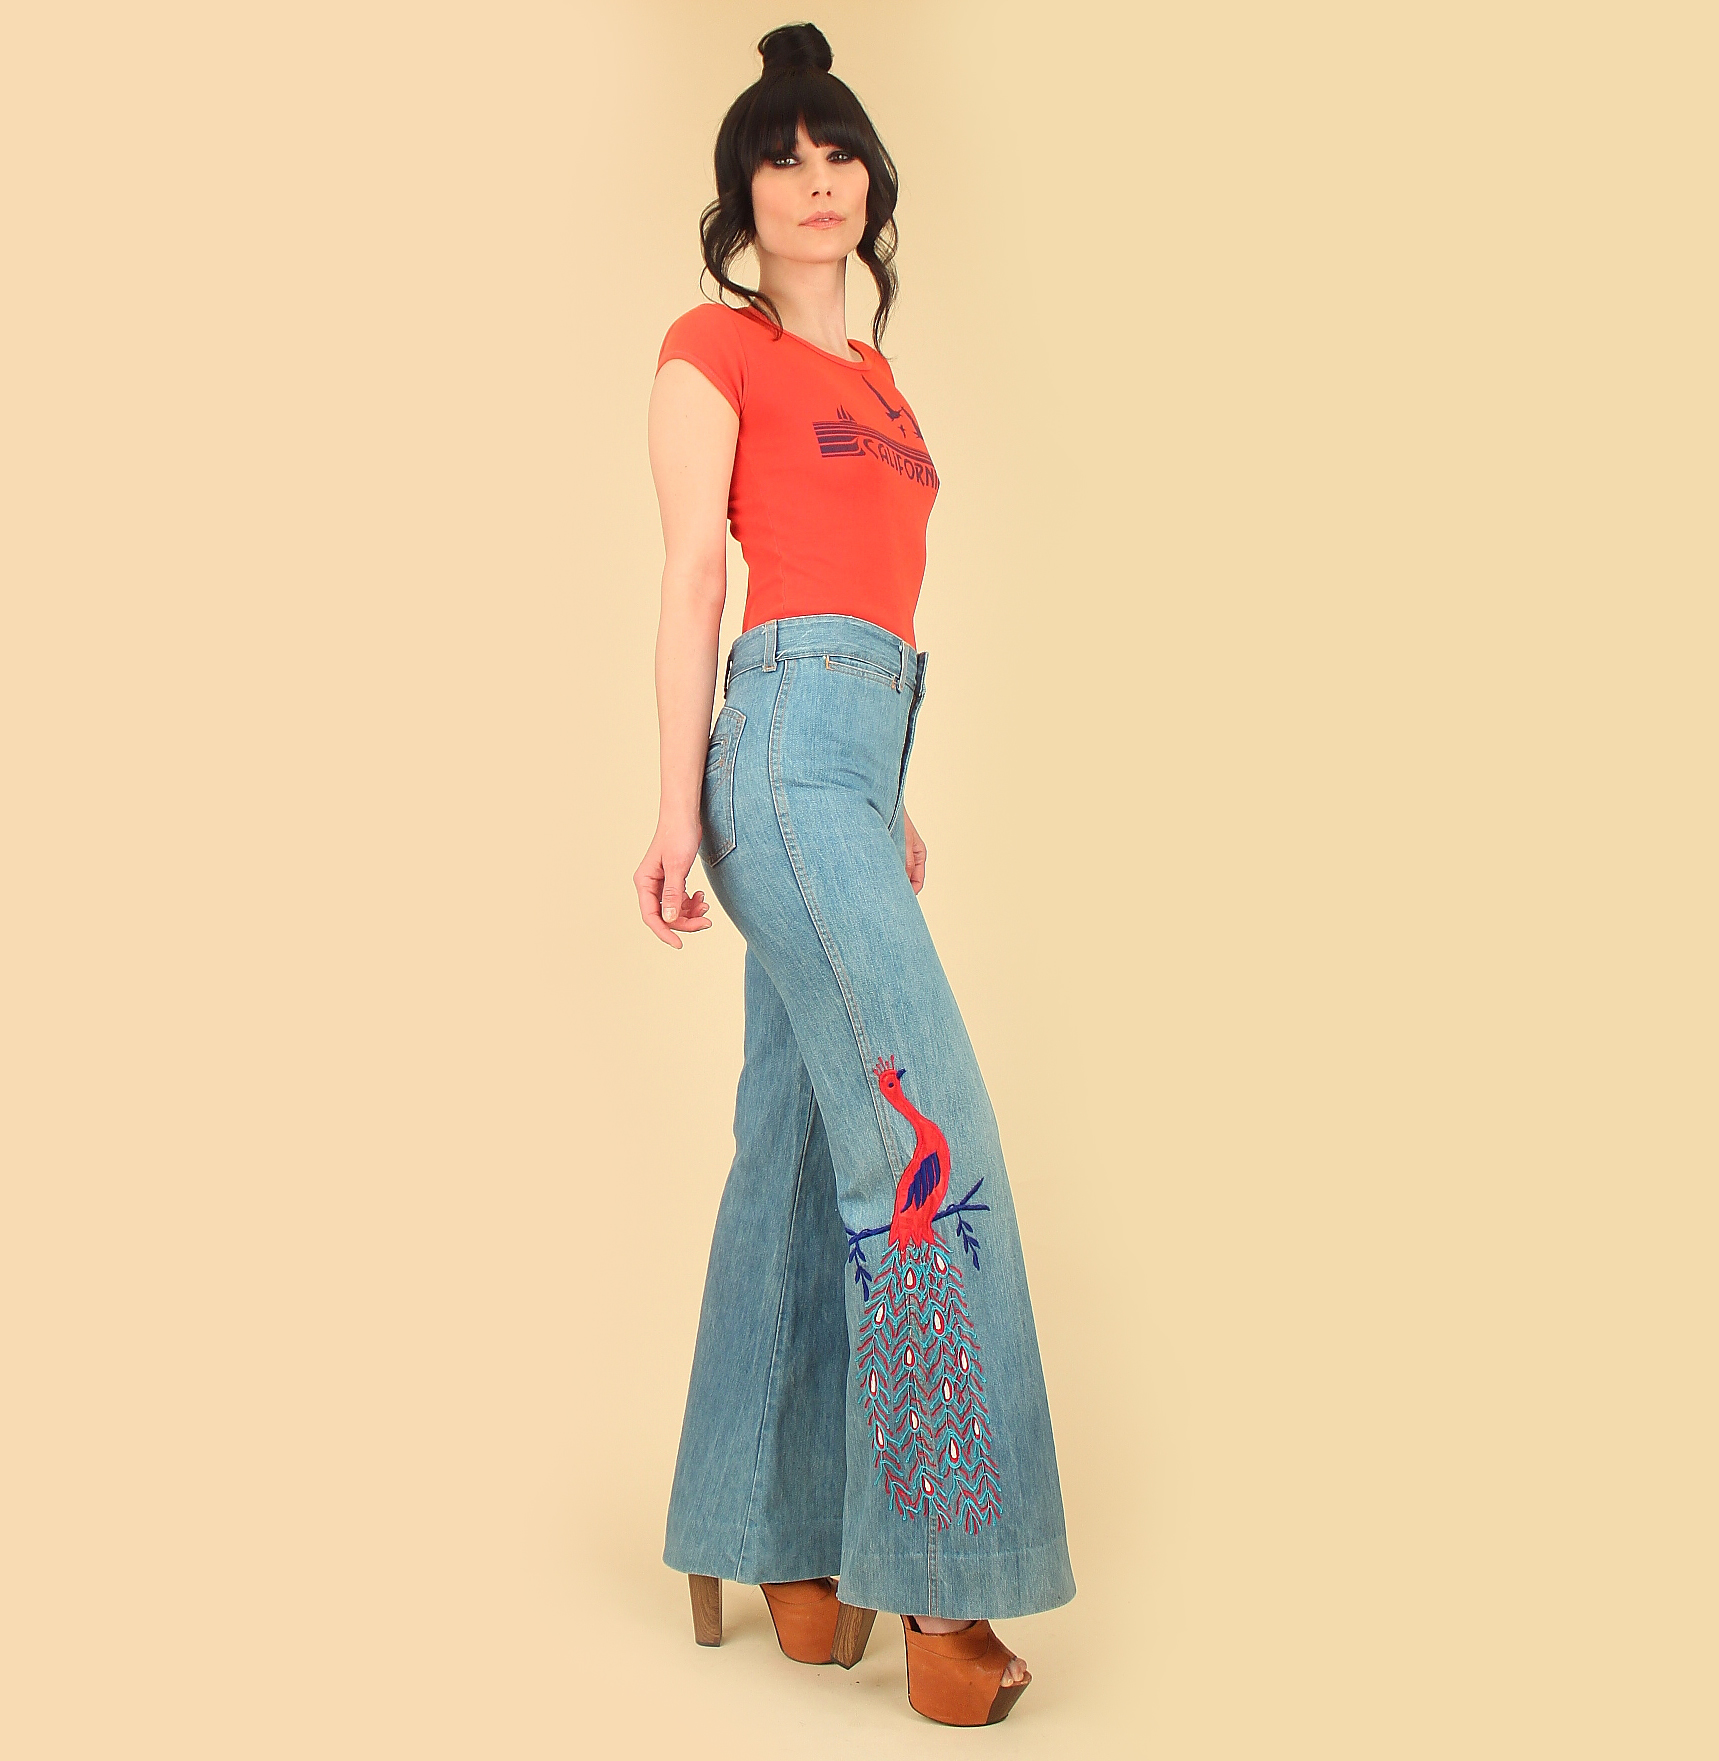 Vintage Embroidered Peacock Bell Bottom Jeans // by Chemin de Fer ...